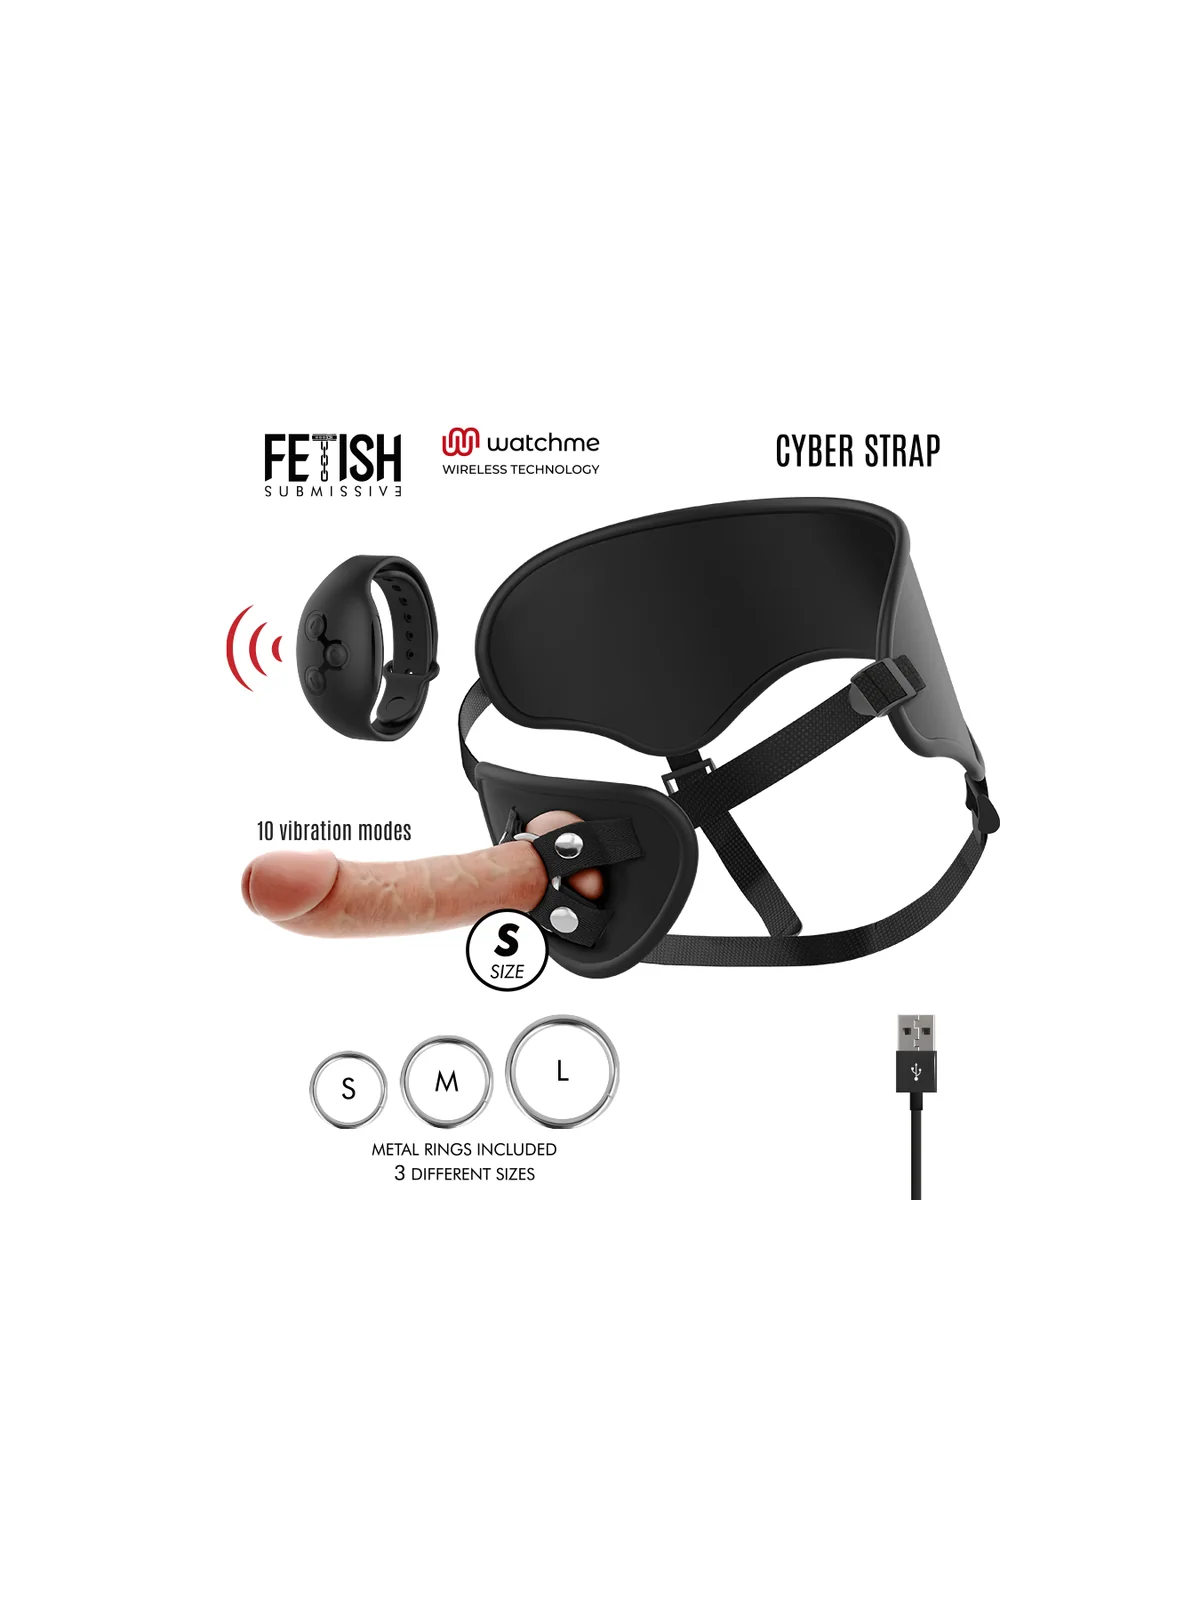 Cyber Strap Remote Harness Watcme Technology S von Fetish Submissive Cyber Strap